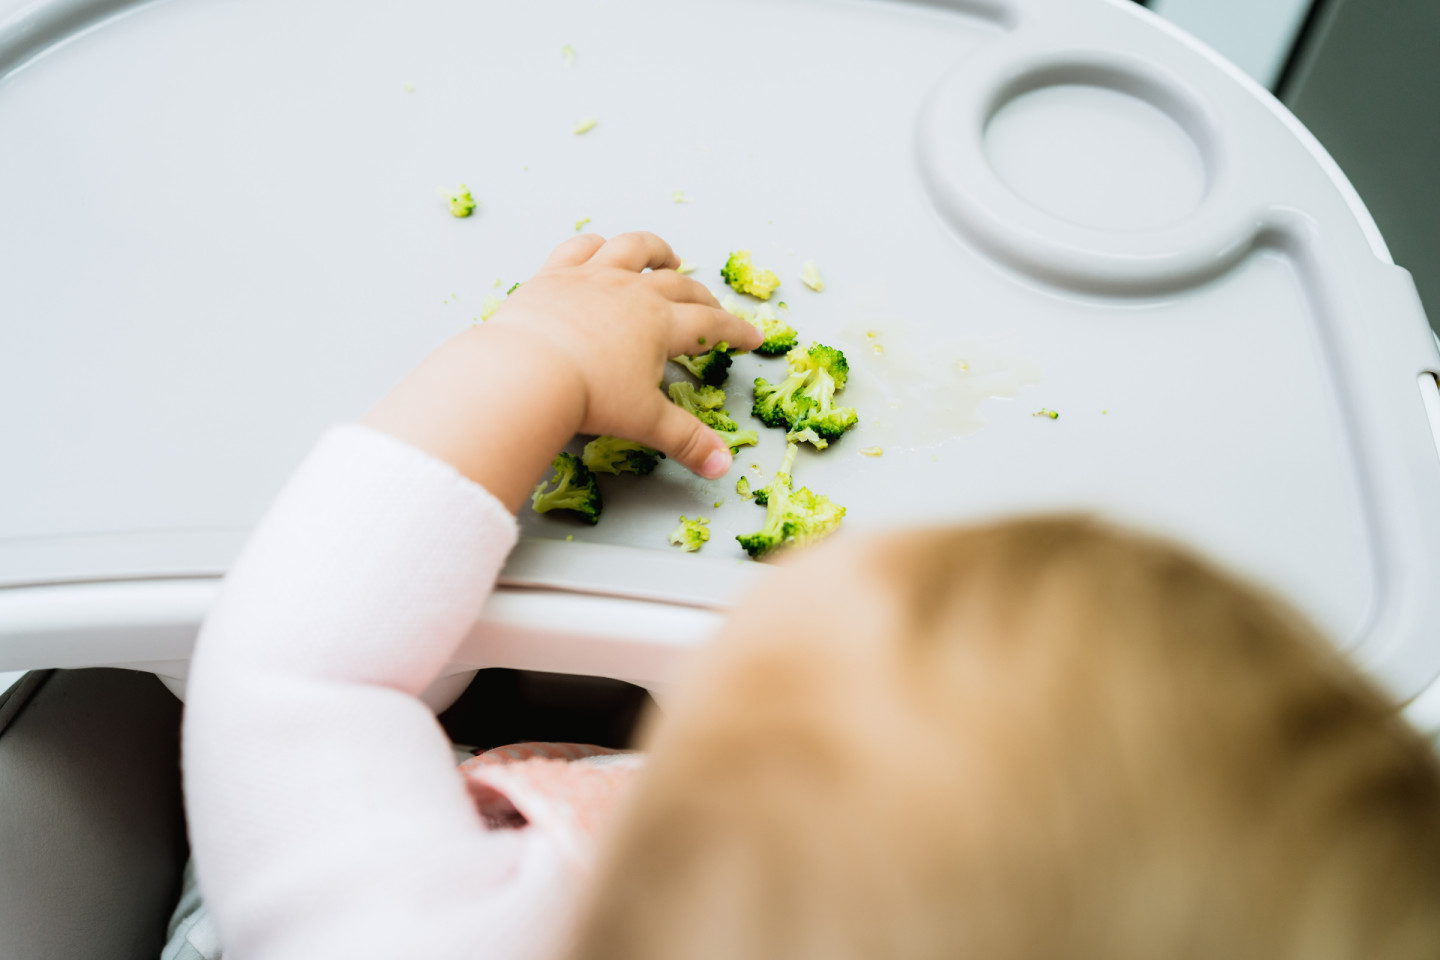 baby led weaning foods broccoli